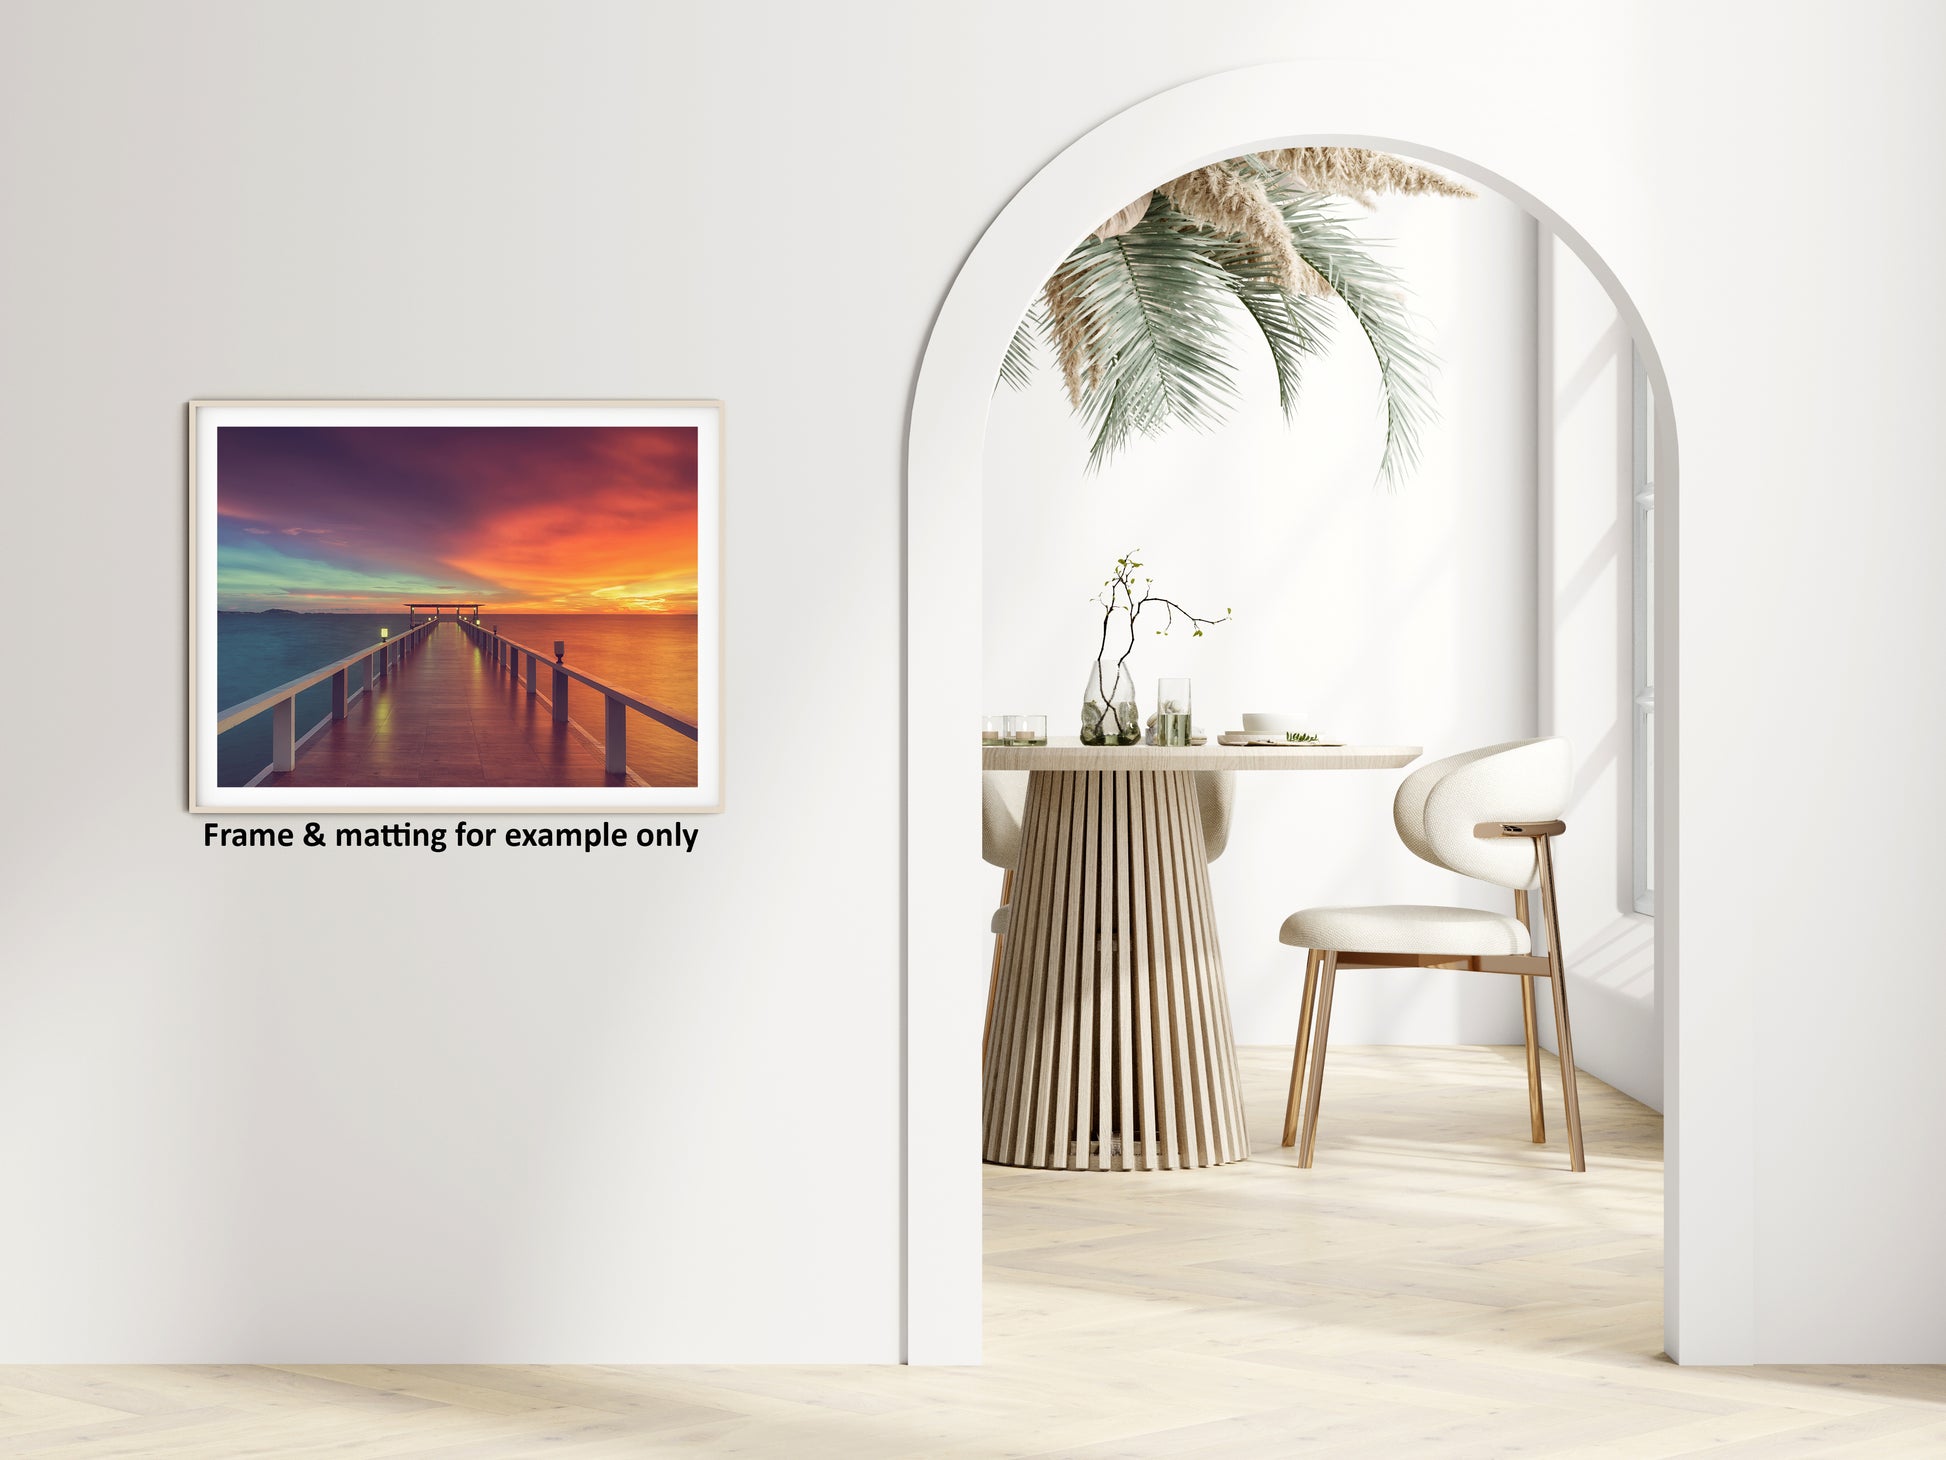 Dining Room Wall Decor Pictures: Surreal Wooden Pier At Sunset with Intrigued Effect Landscape Photo Loose Wall Art Prints